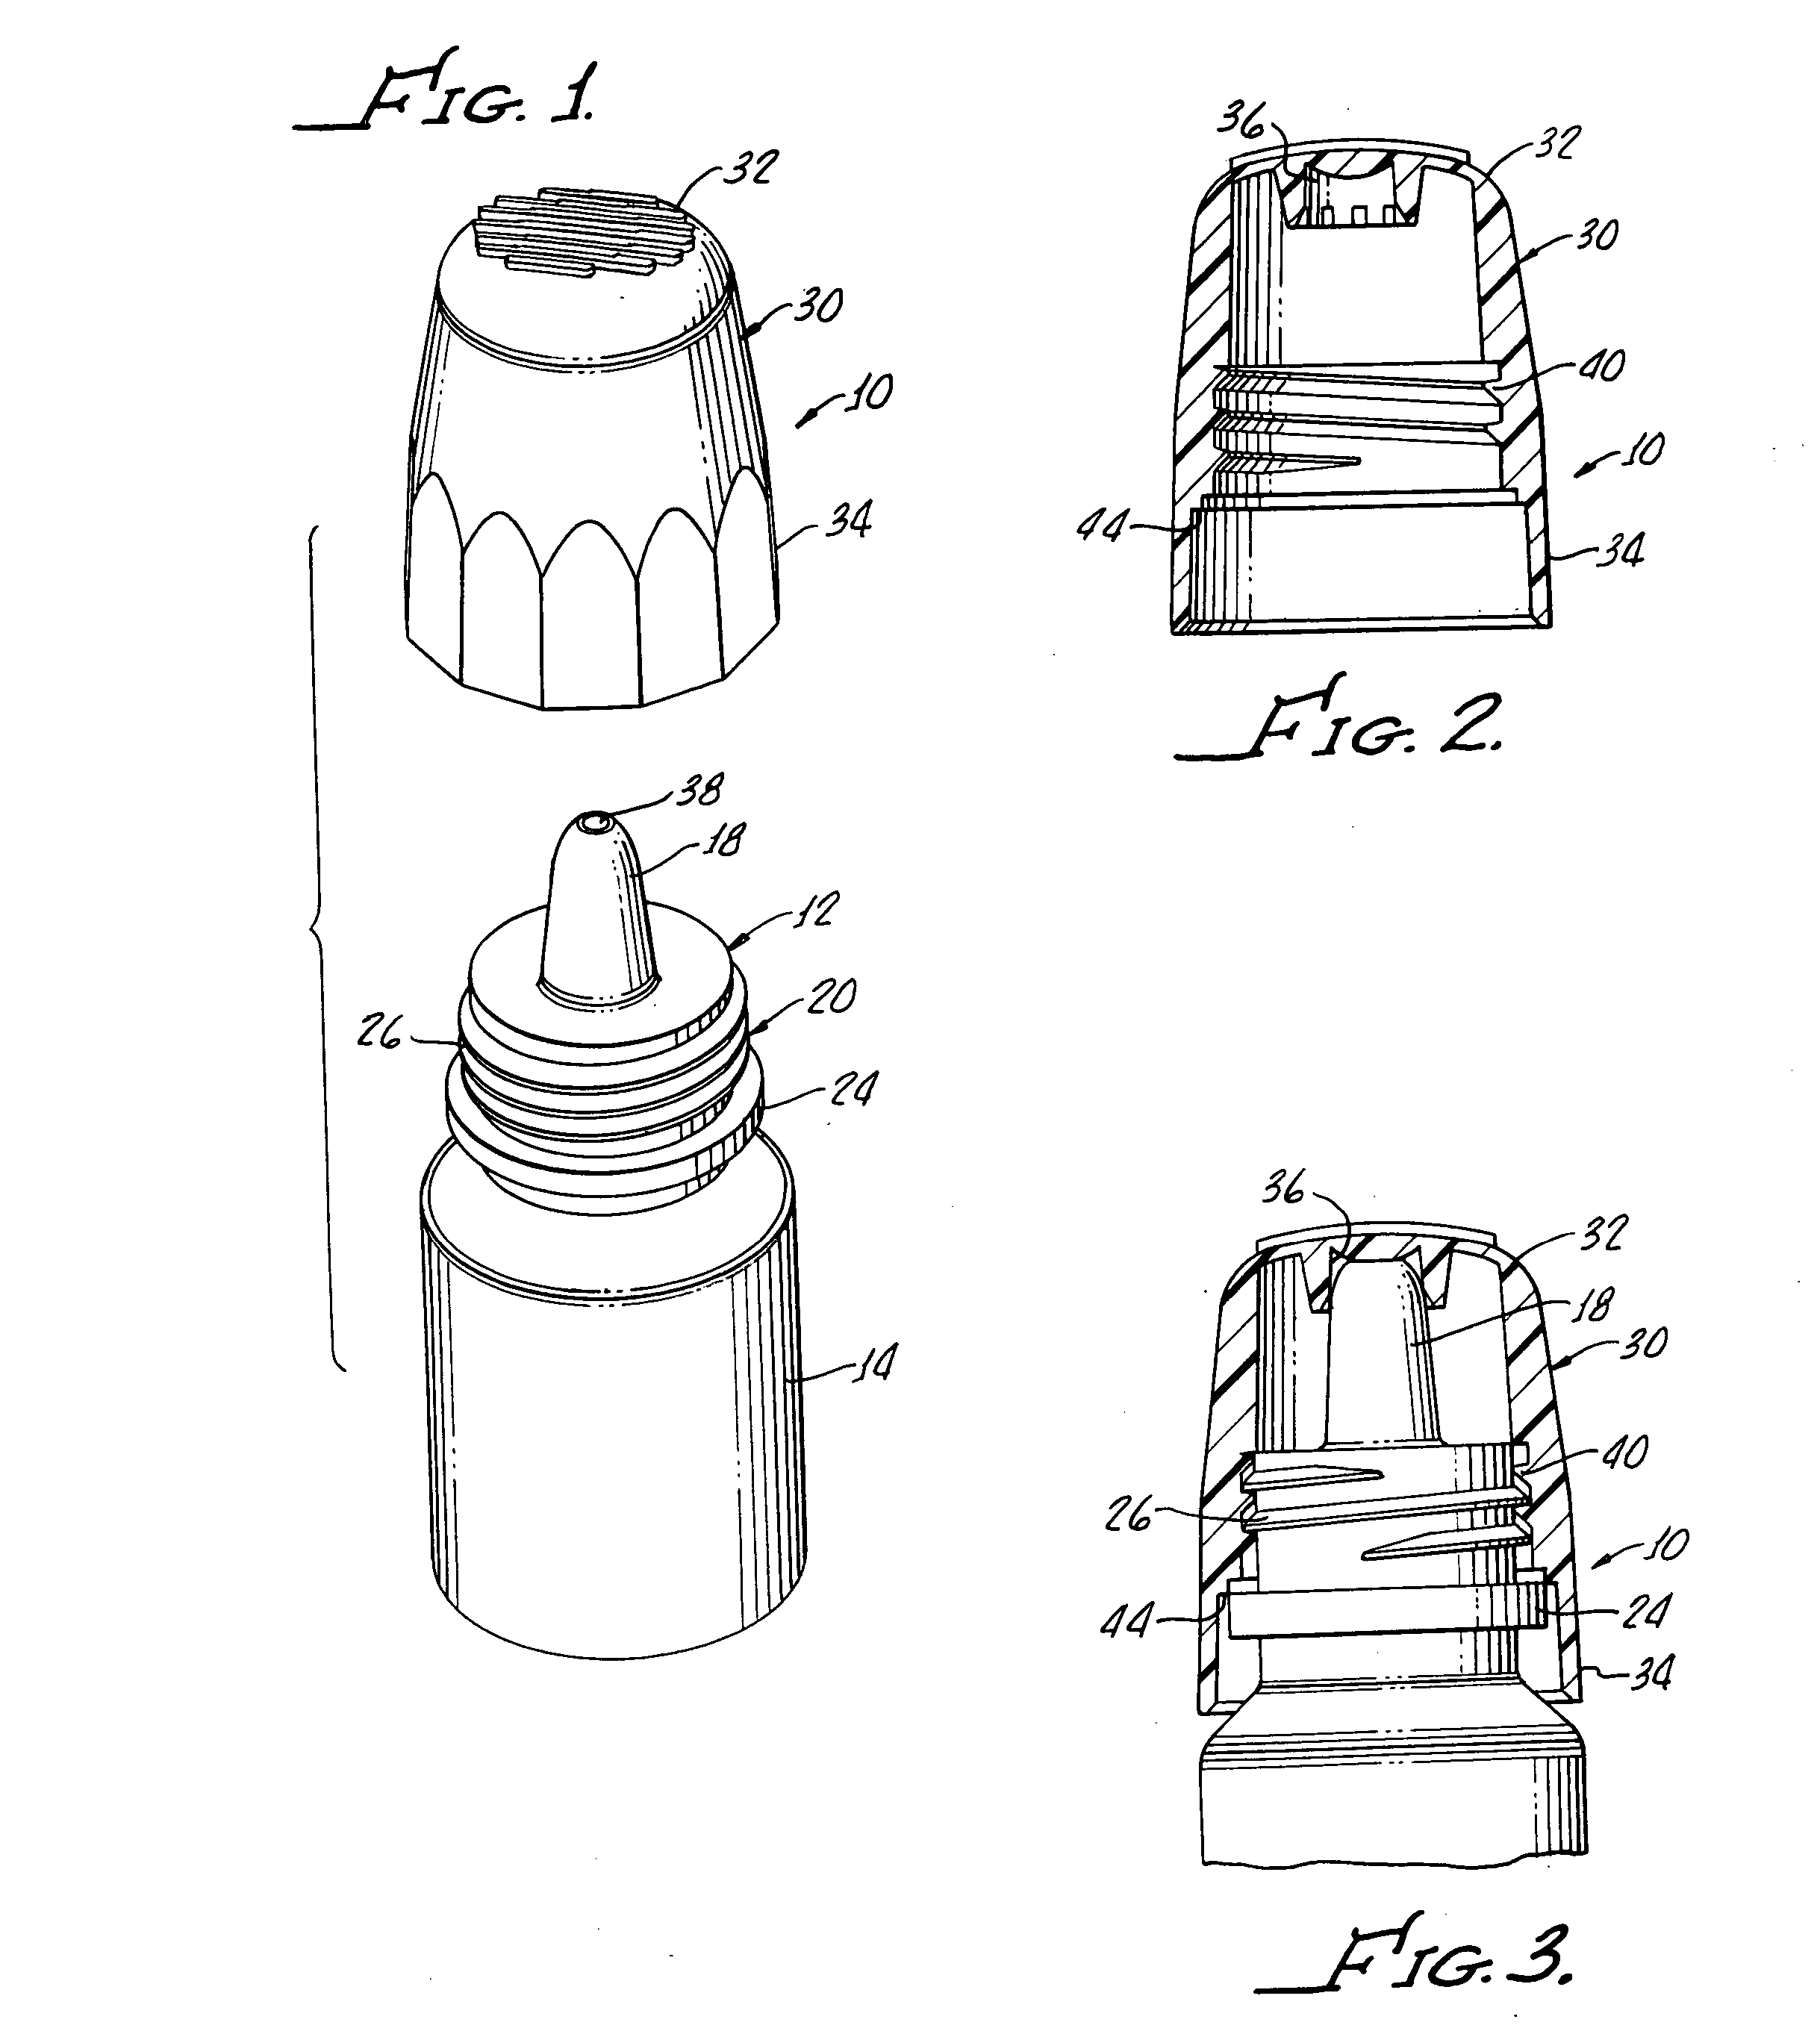 Skirted closure for small dropper bottles